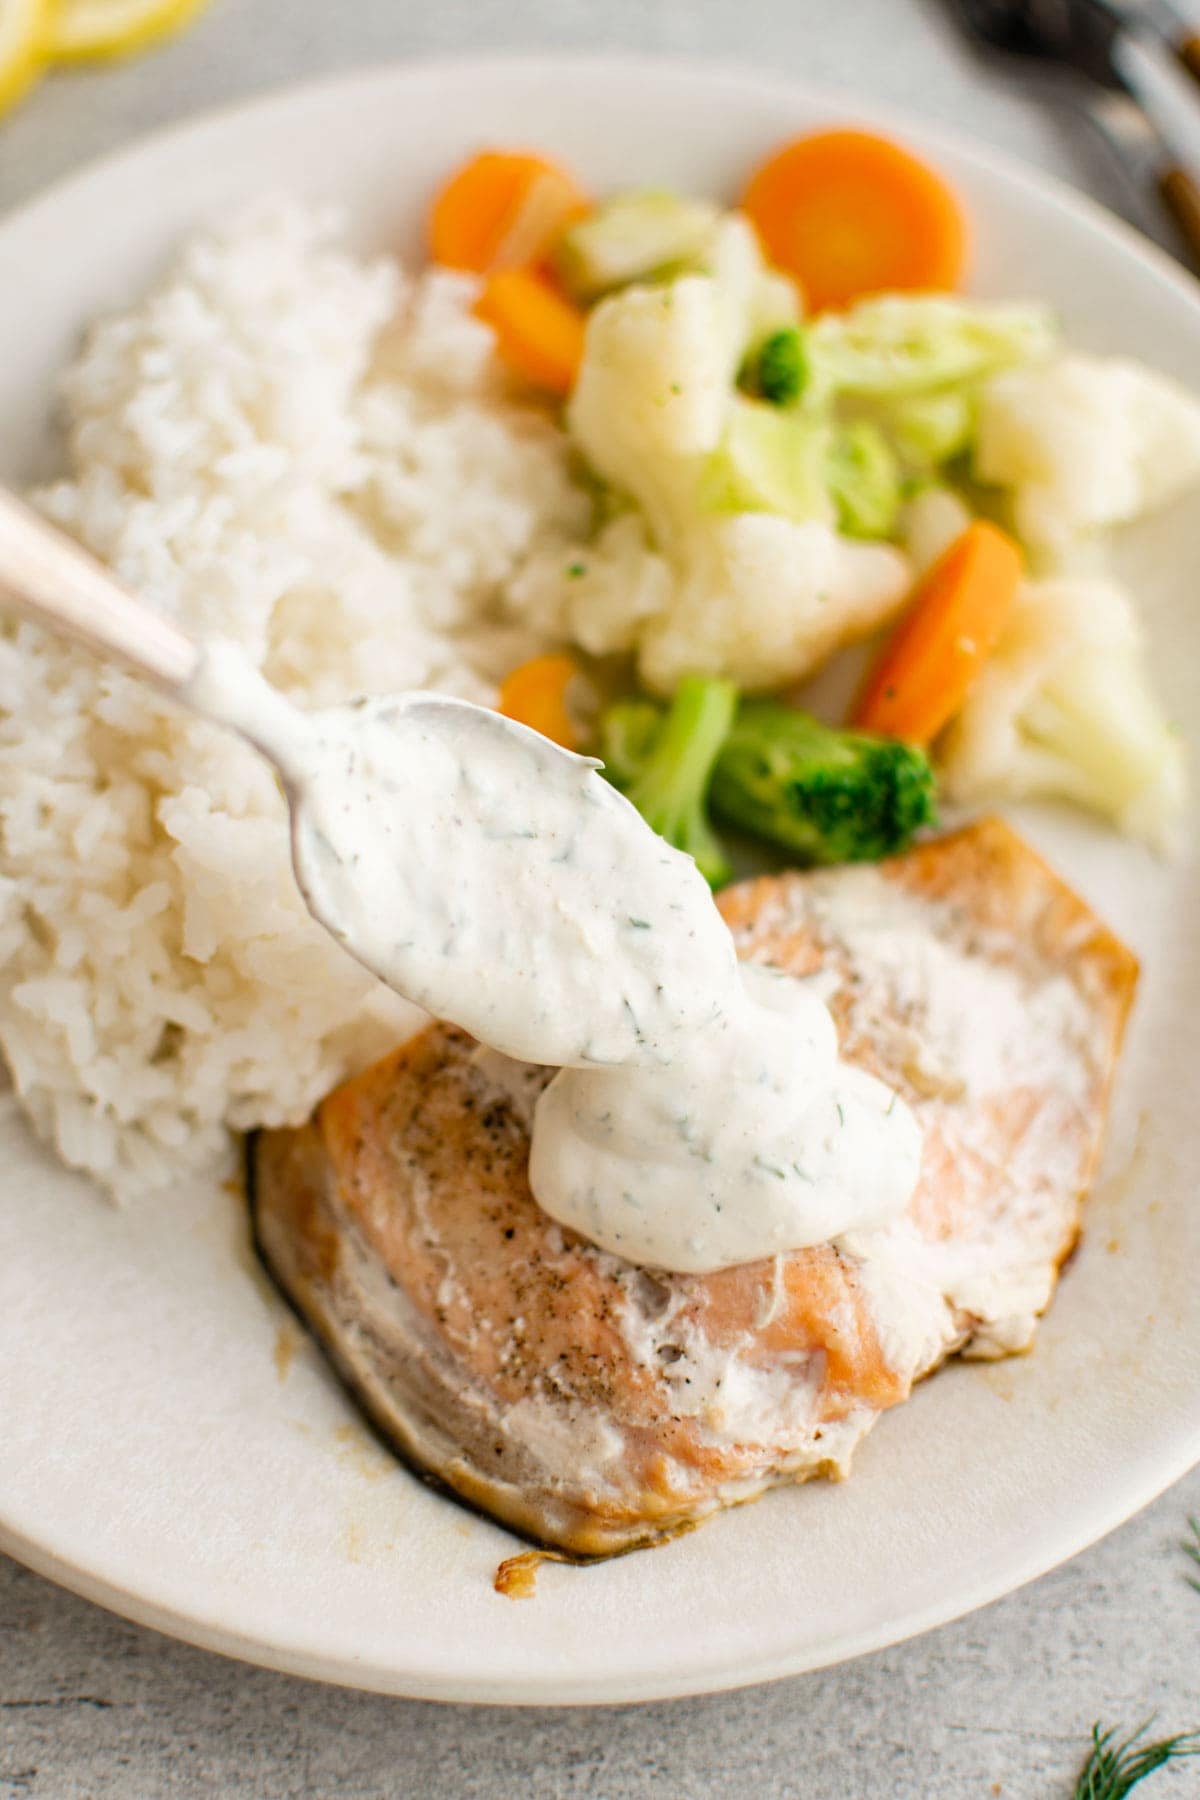 Spoon dill sauce onto a piece of salmon on a white plate. 